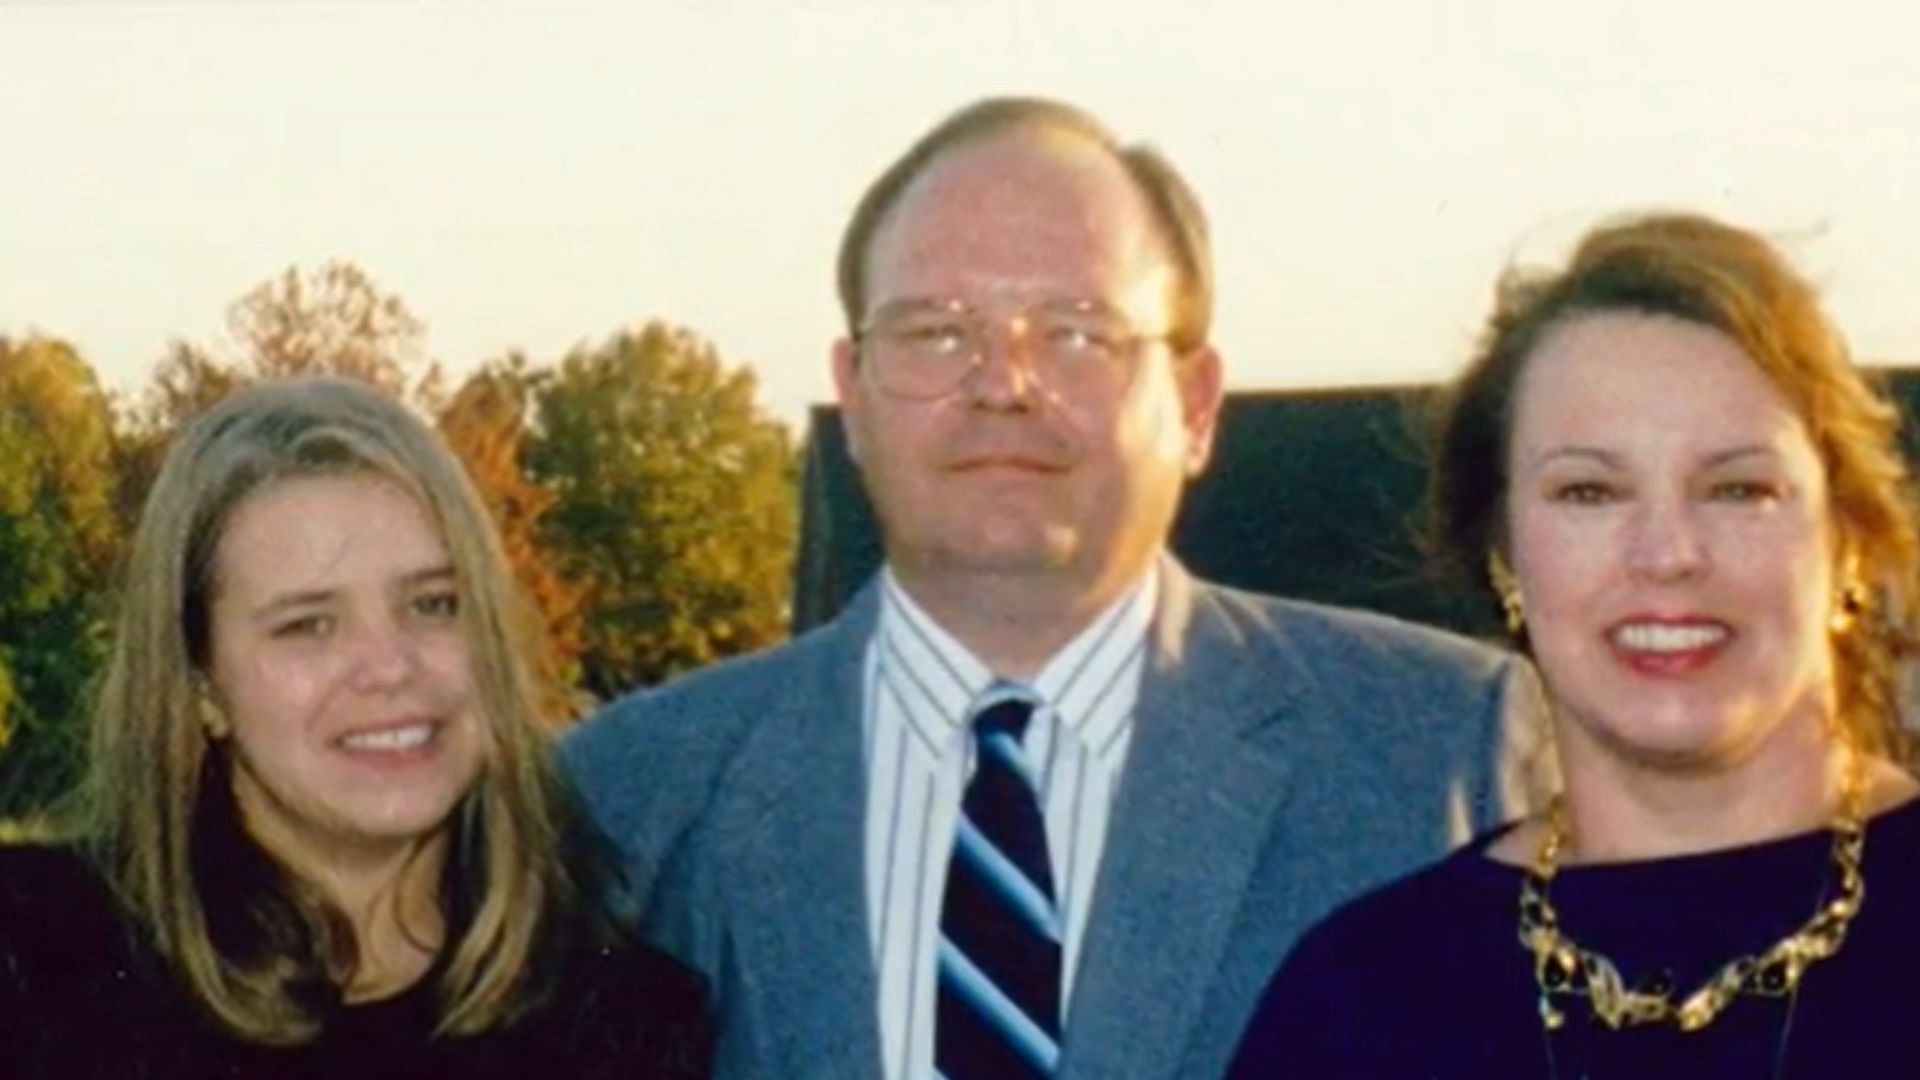 A still of Gary Tyrrell and Jan Tyrrell with their daughter Jessica (Image Via NBC News)